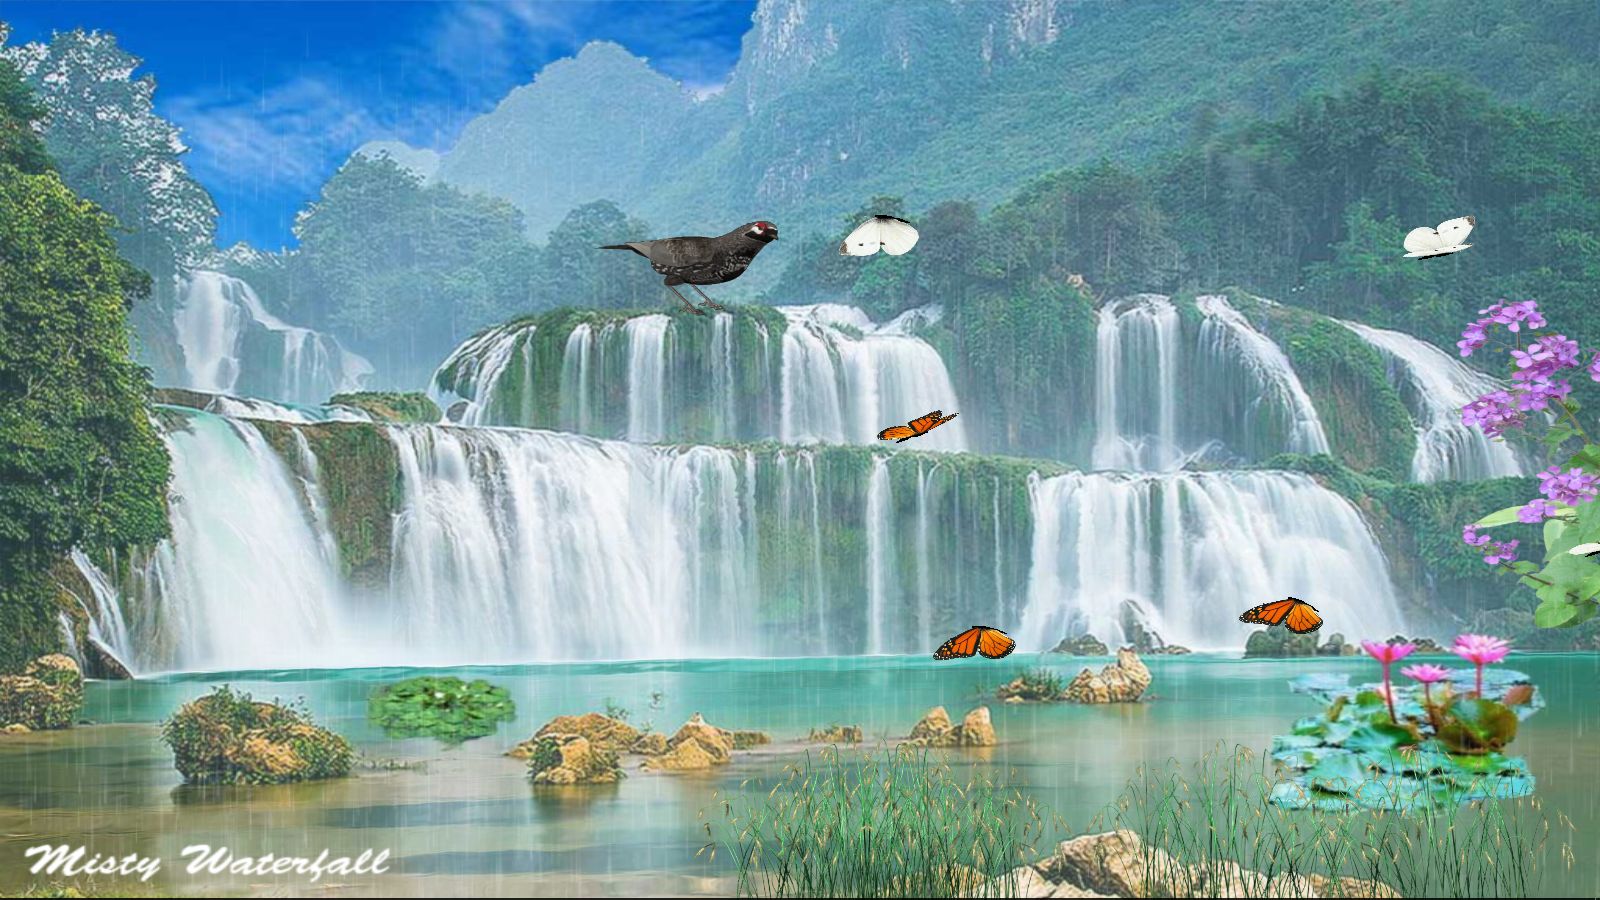 Water Fall Images Download - HD Wallpaper 